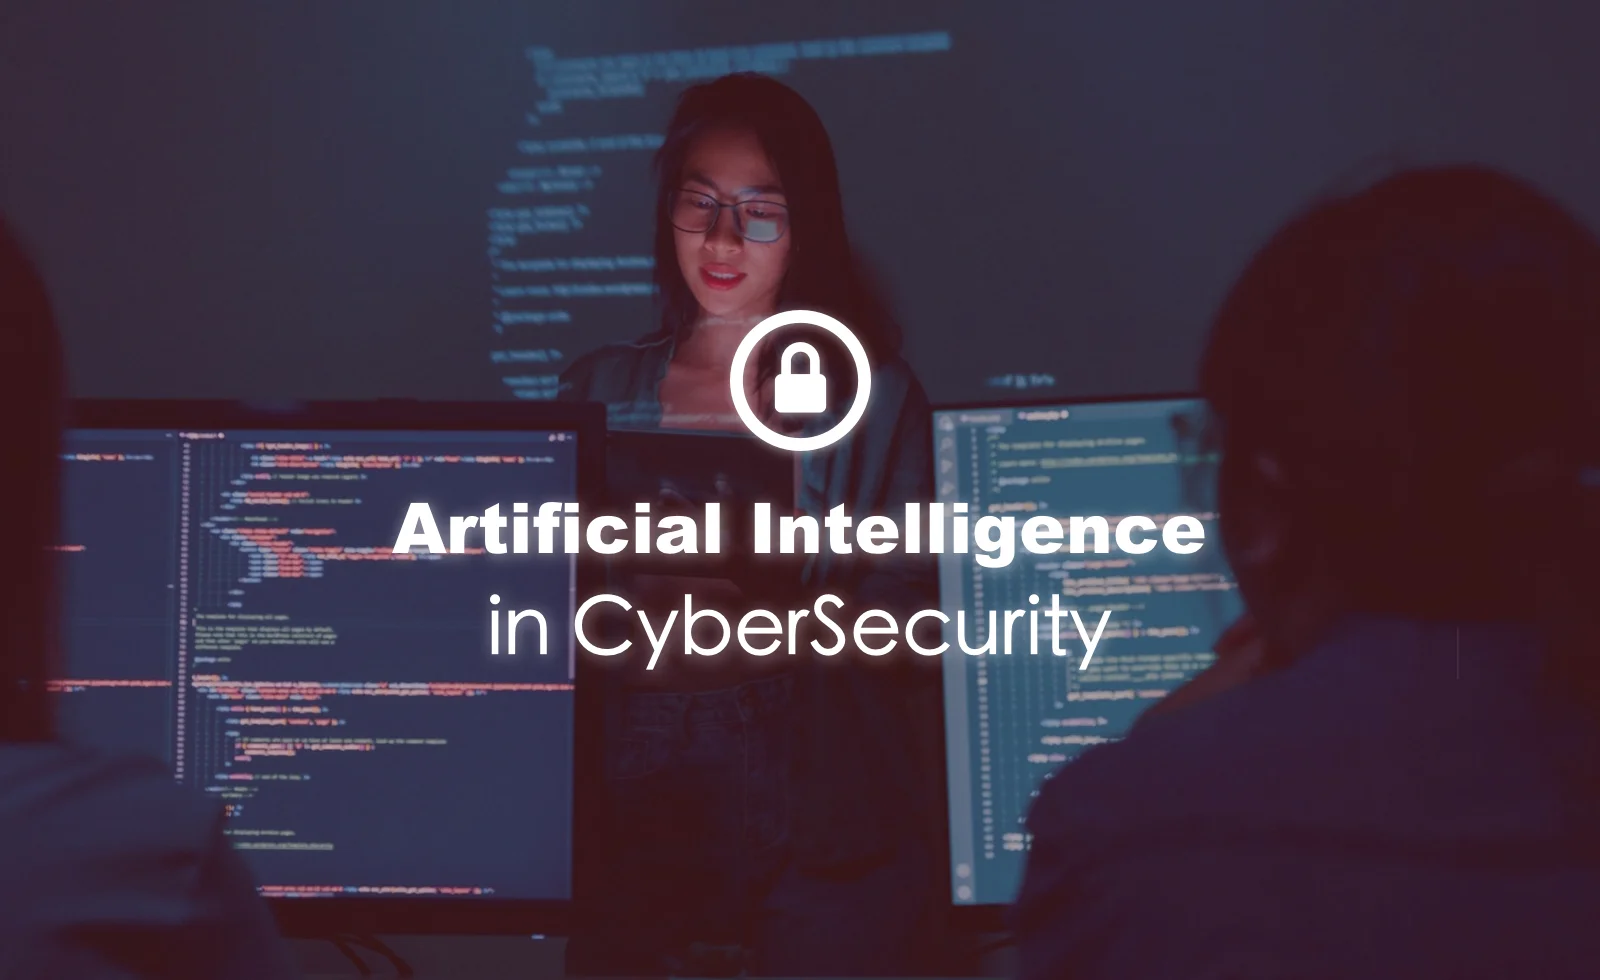 Role of Artificial Intelligence in CyberSecurity